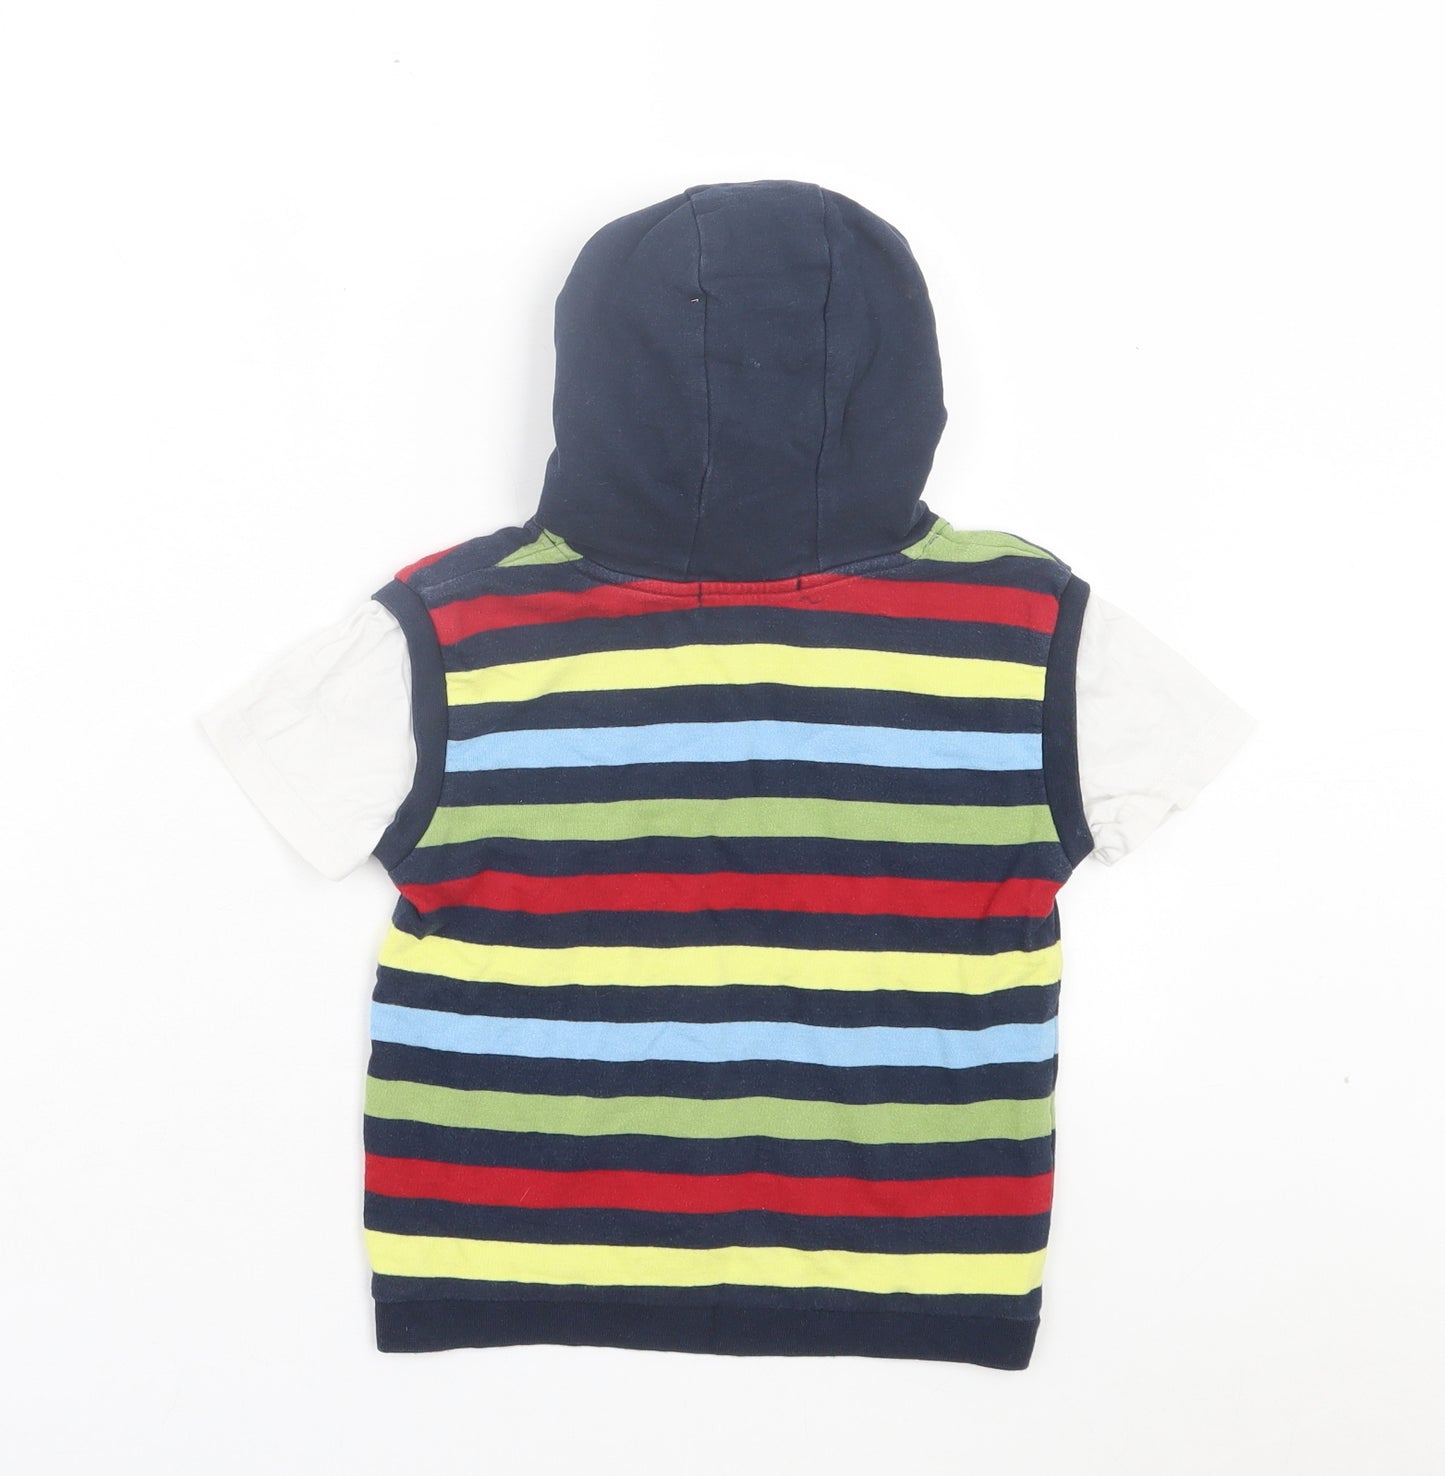 George Boys Multicoloured Striped Cotton Pullover Hoodie Size 2 Years Pullover